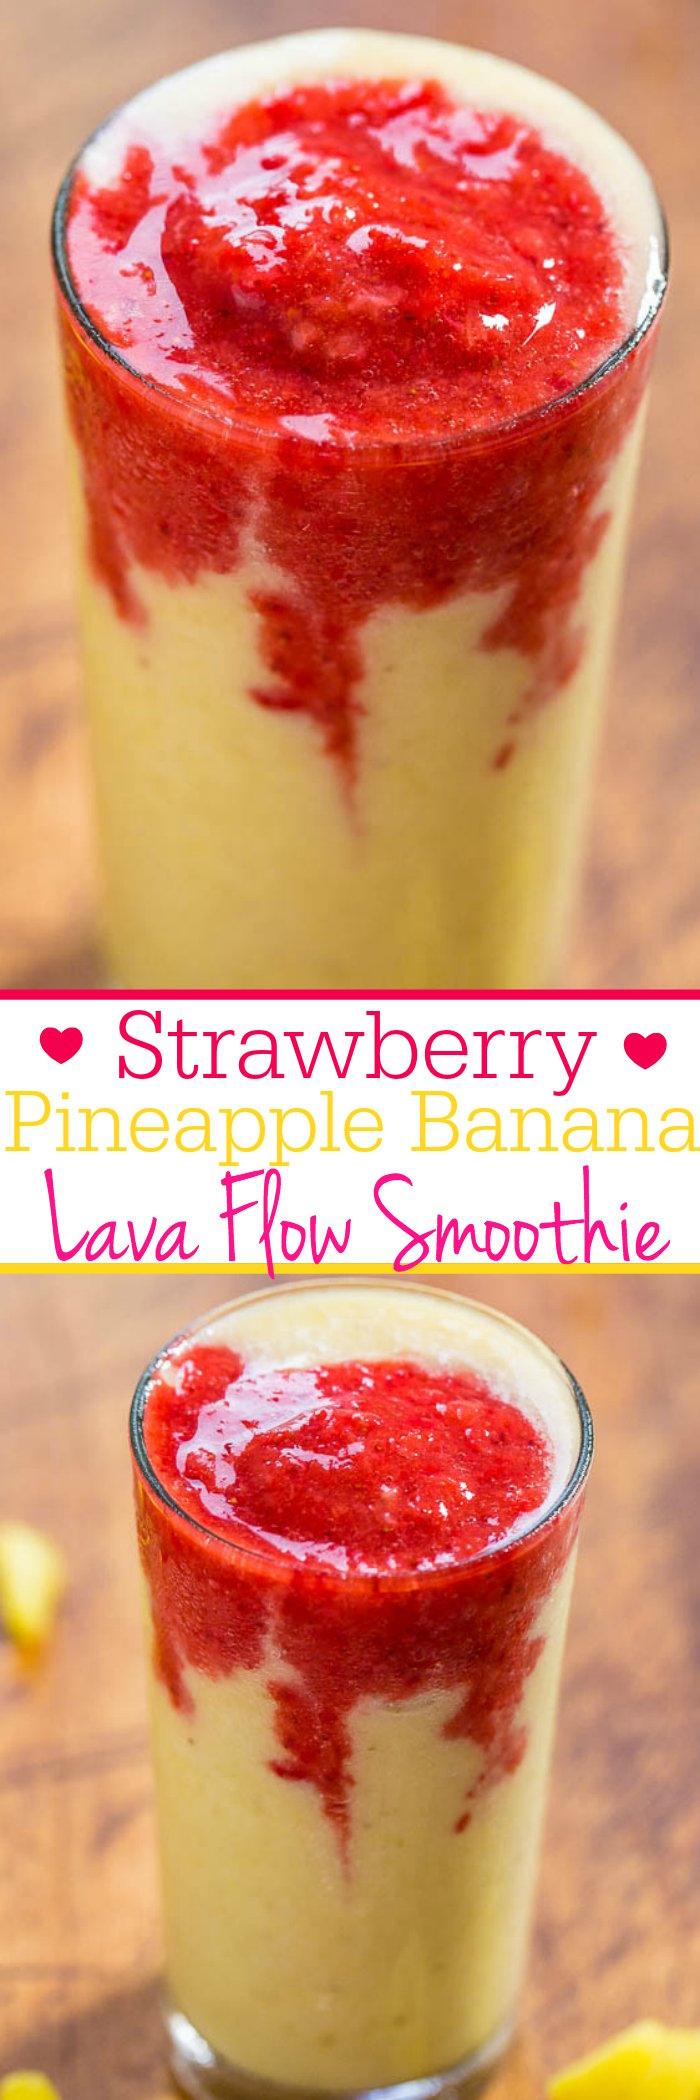 Strawberry Pineapple Banana Lava Flow Smoothie - Refreshing, fast, easy, with no added sugar, and tastes great! (Bonus: Looks super cool!!)